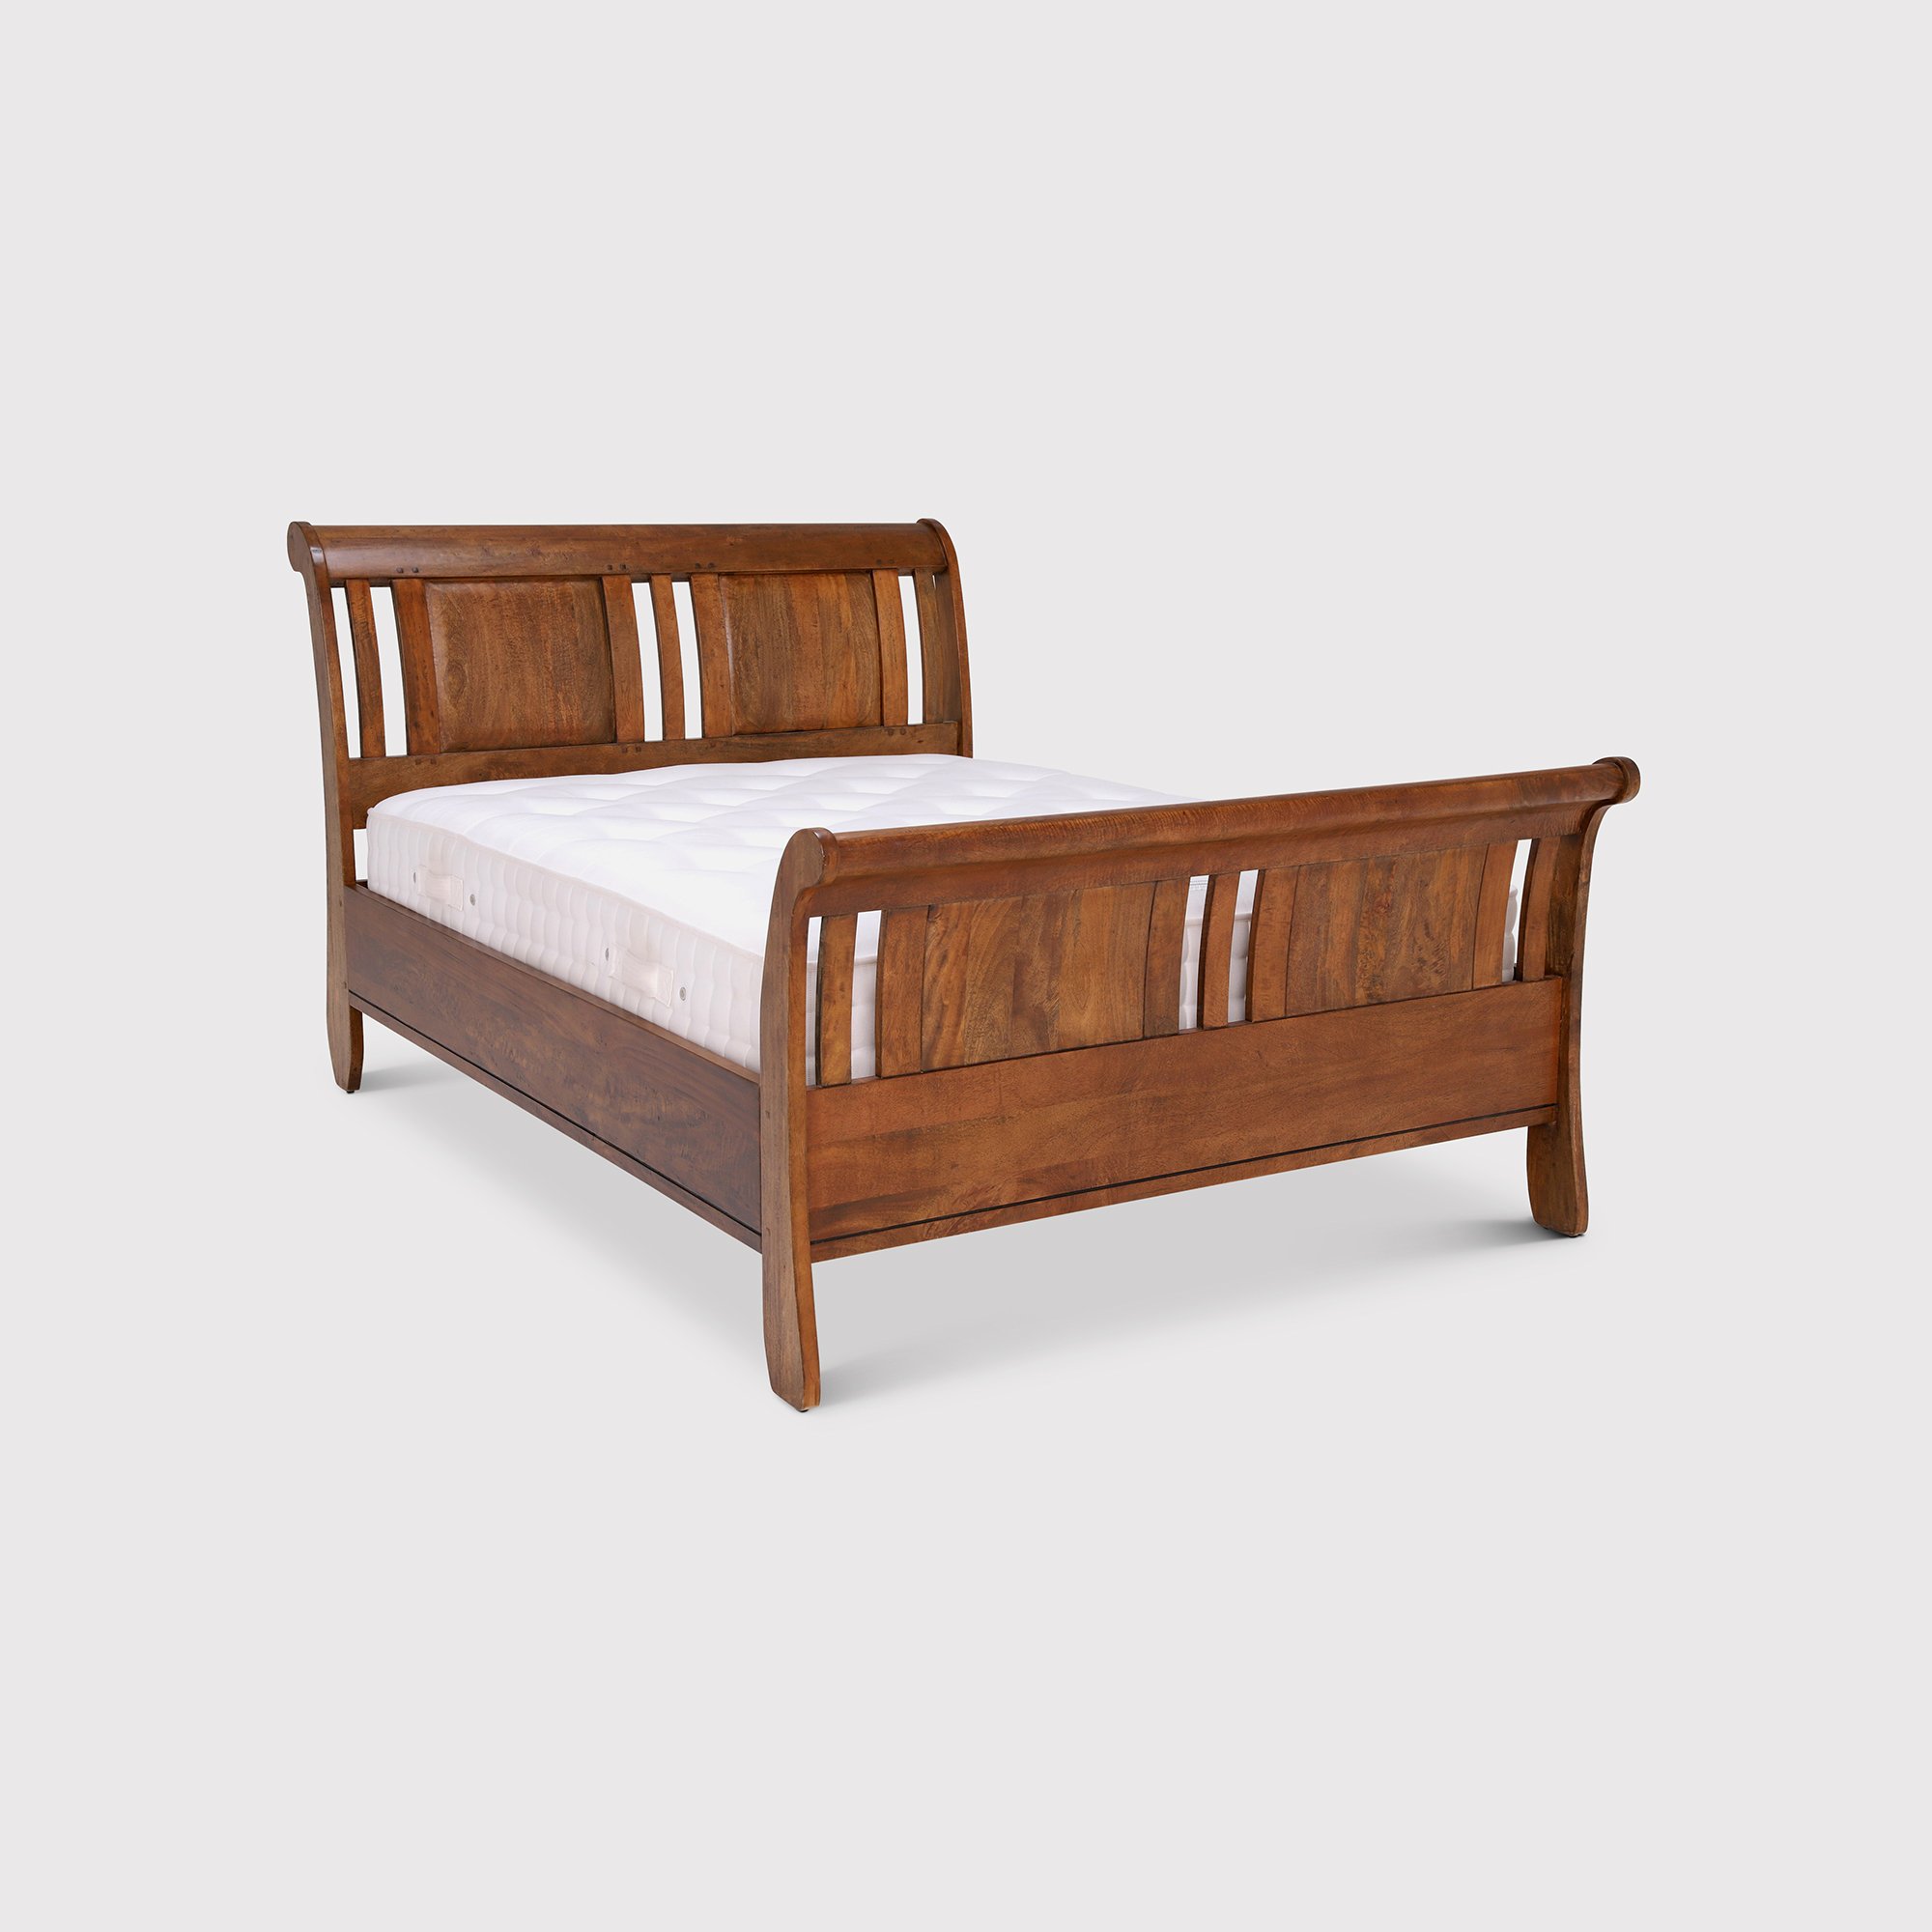 New Frontier 135cm Sleigh Bed, Brown | Double | Barker & Stonehouse